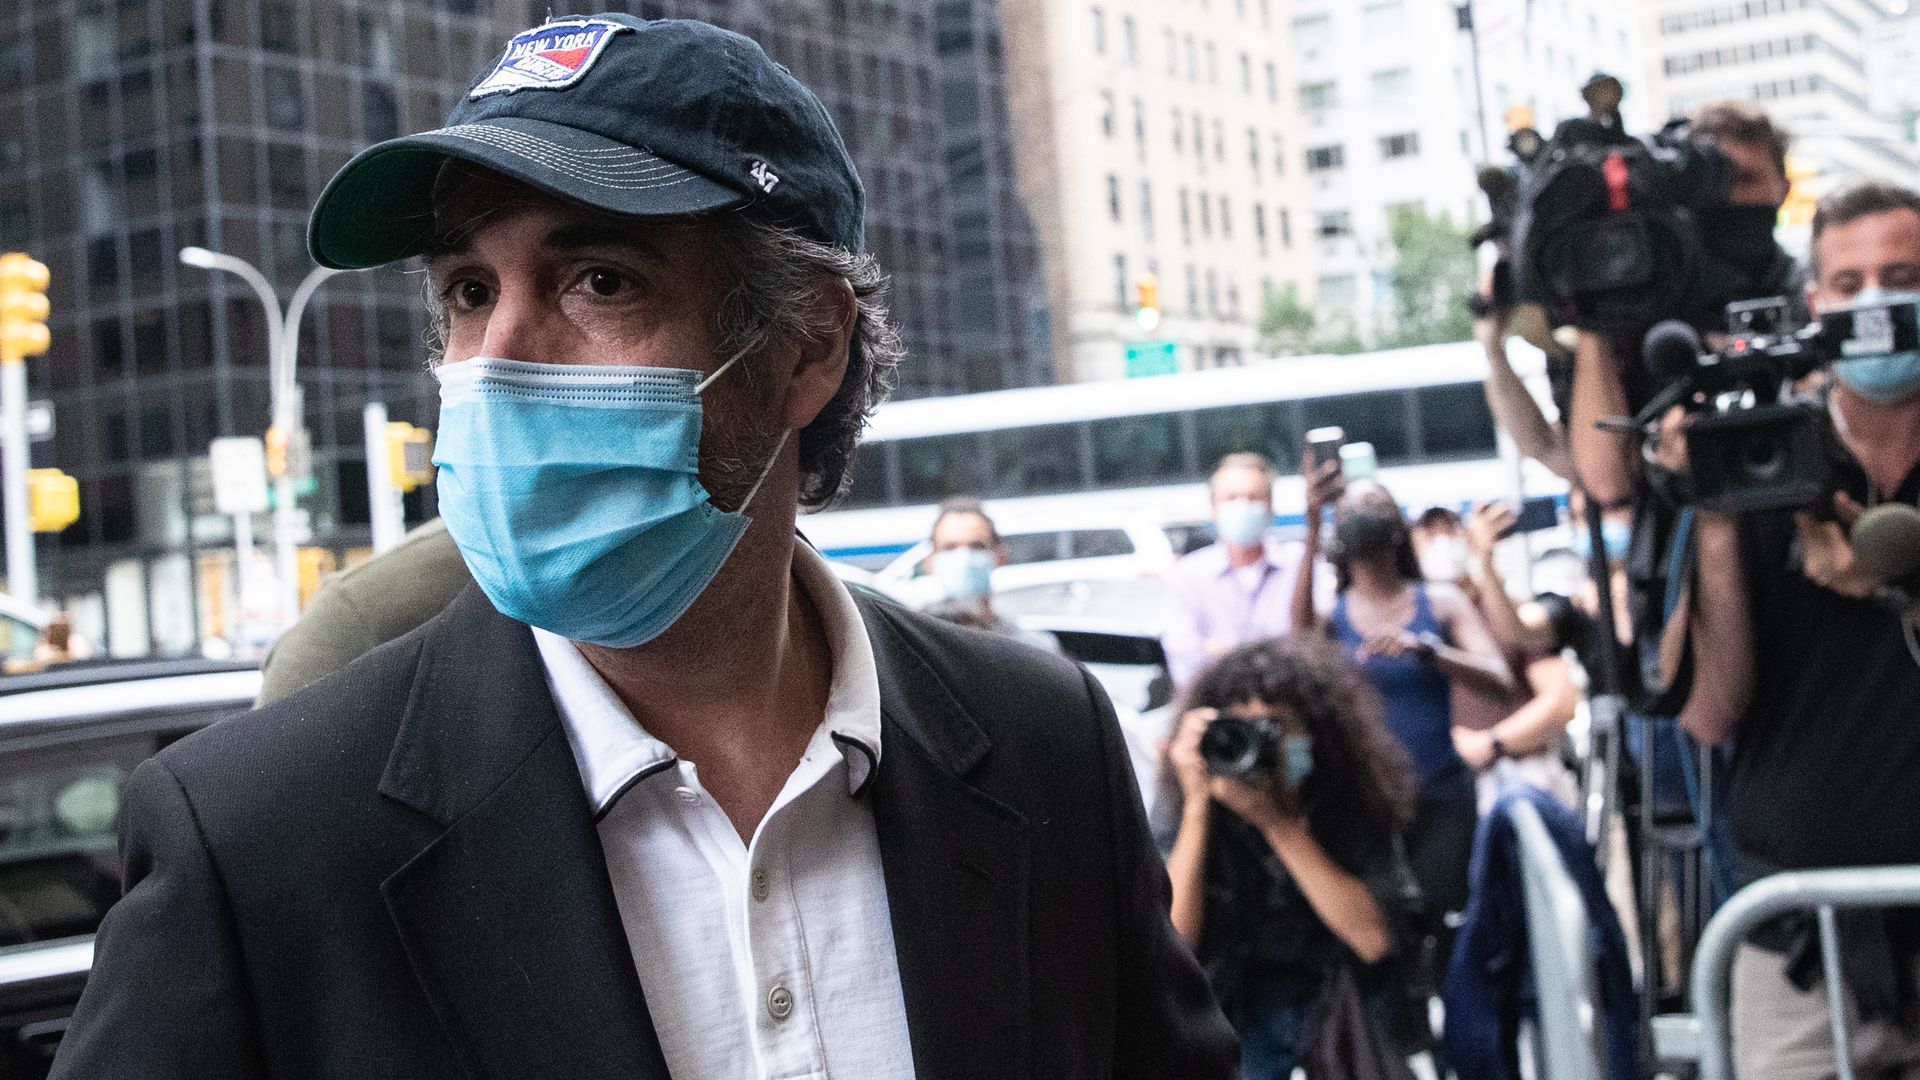 Michael Cohen, President Trump's former attorney arrives at his Park Avenue home after being released from federal prison on July 24, 2020 in New York City.